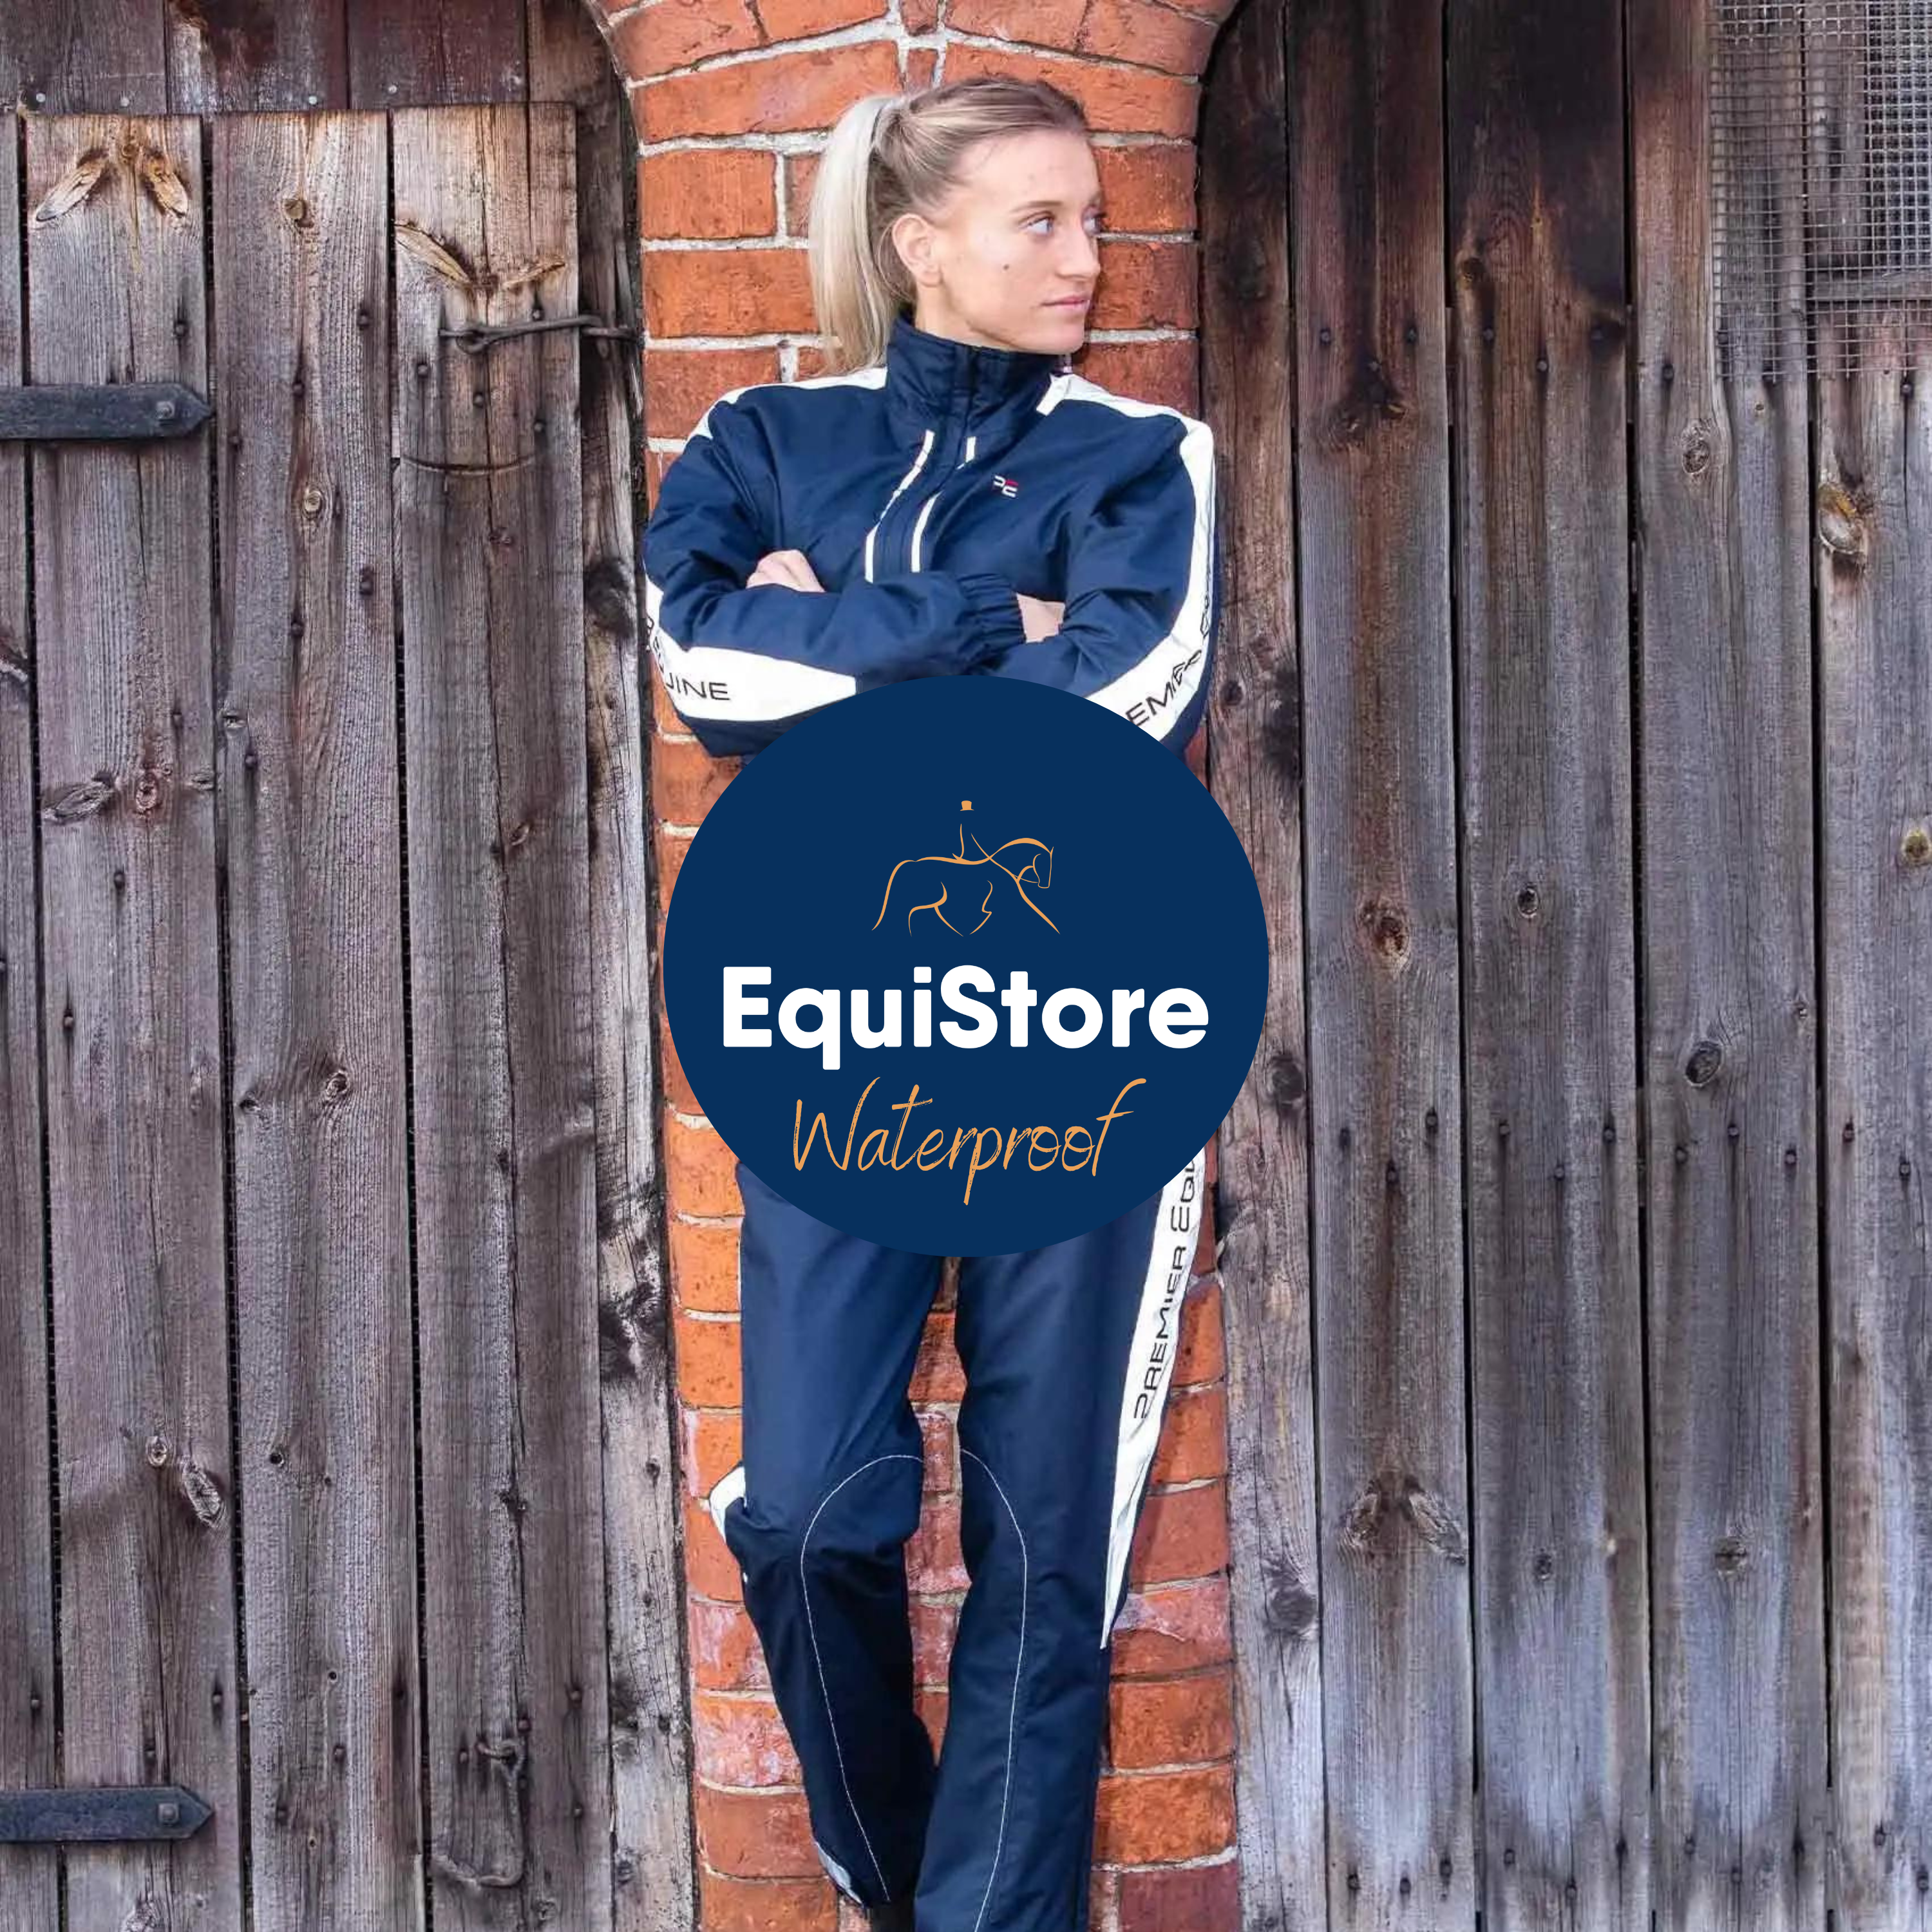 Waterproof Clothing for horse riding and equestrian activities